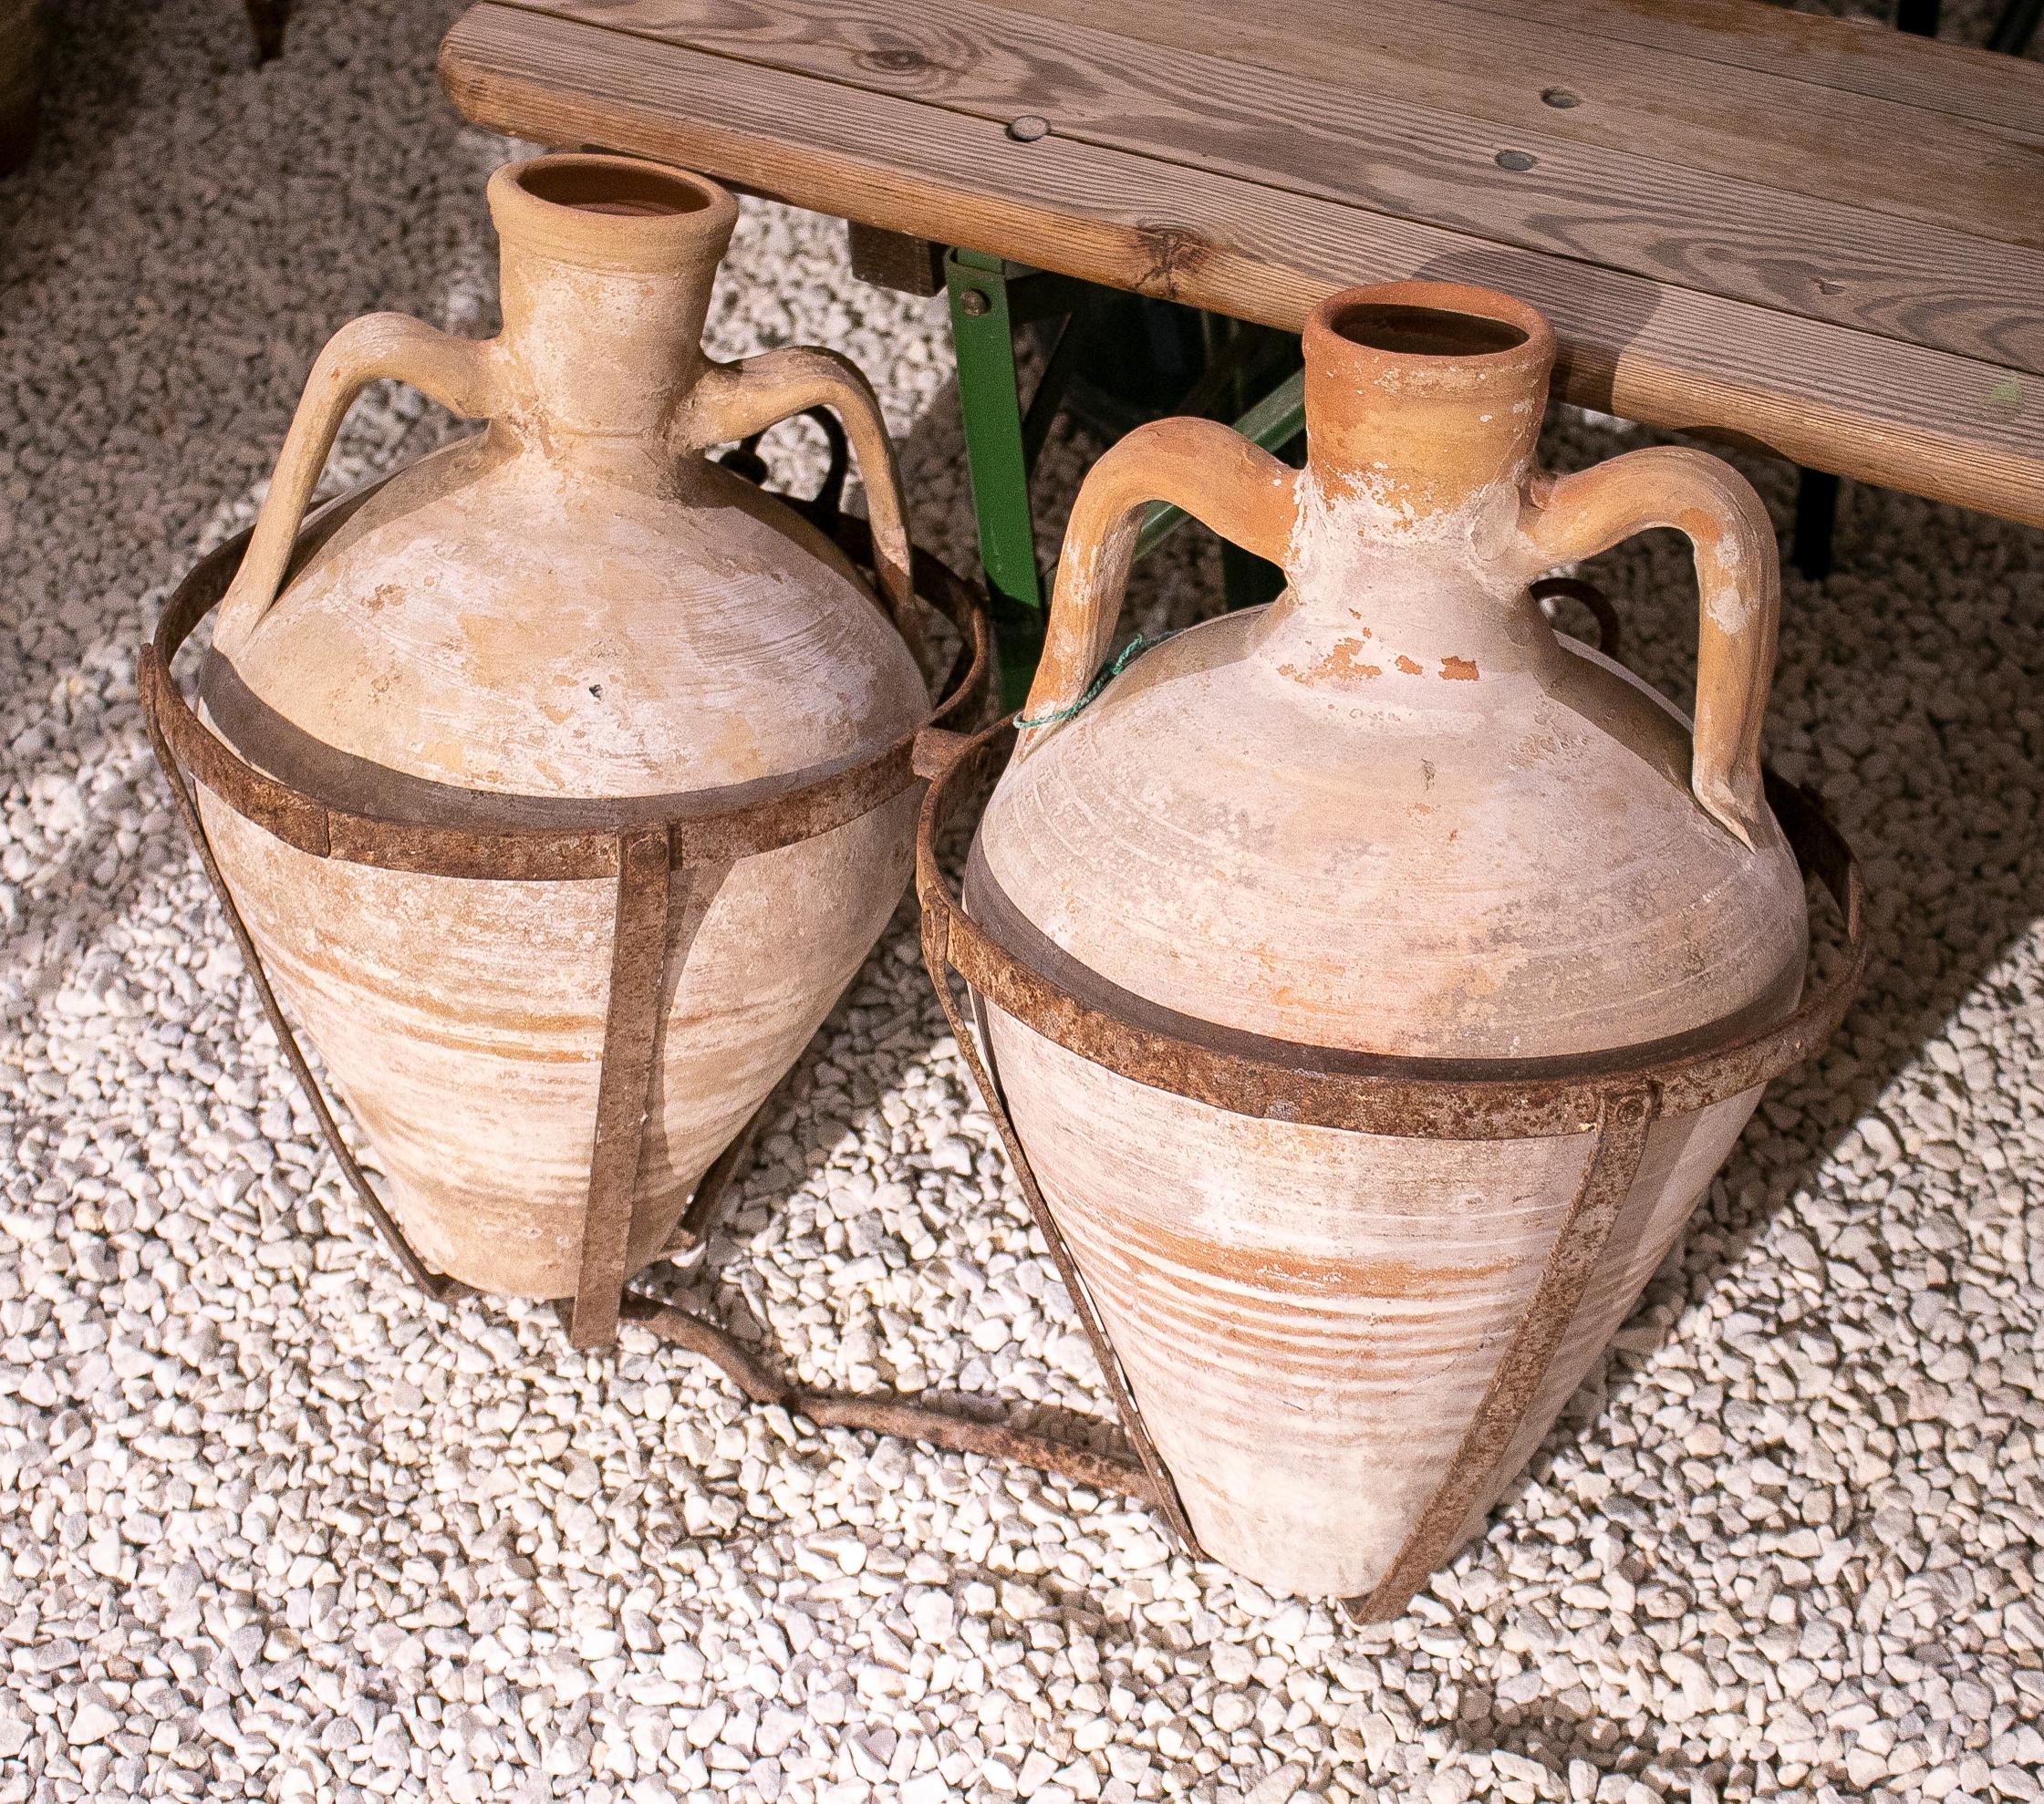 Pair of 1930s Spanish terracotta vases with iron basket to be carried by mules or donkeys.